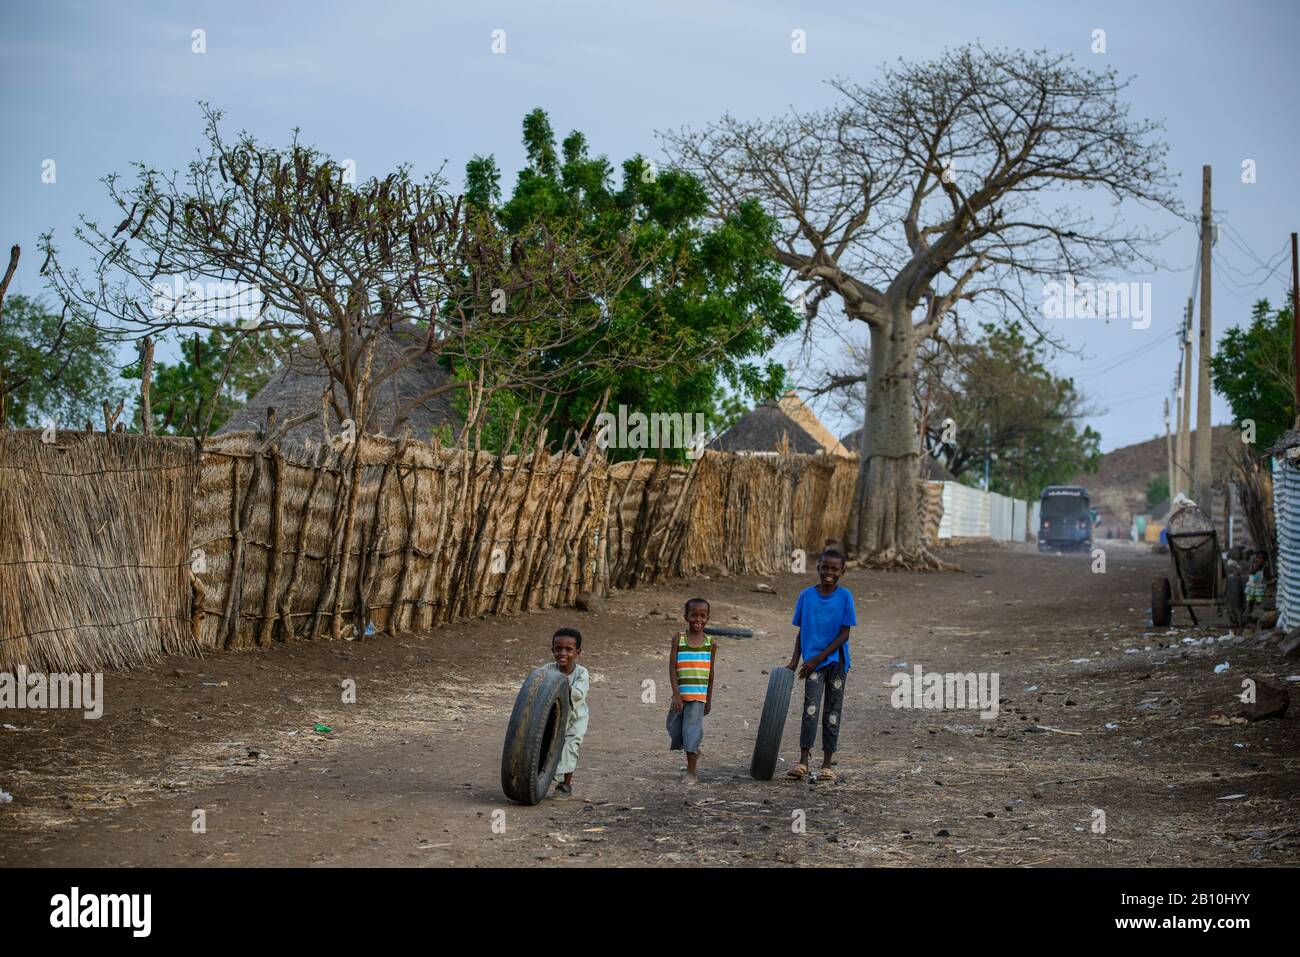 Children play with old tires near al-Galabat, Sudan Stock Photo